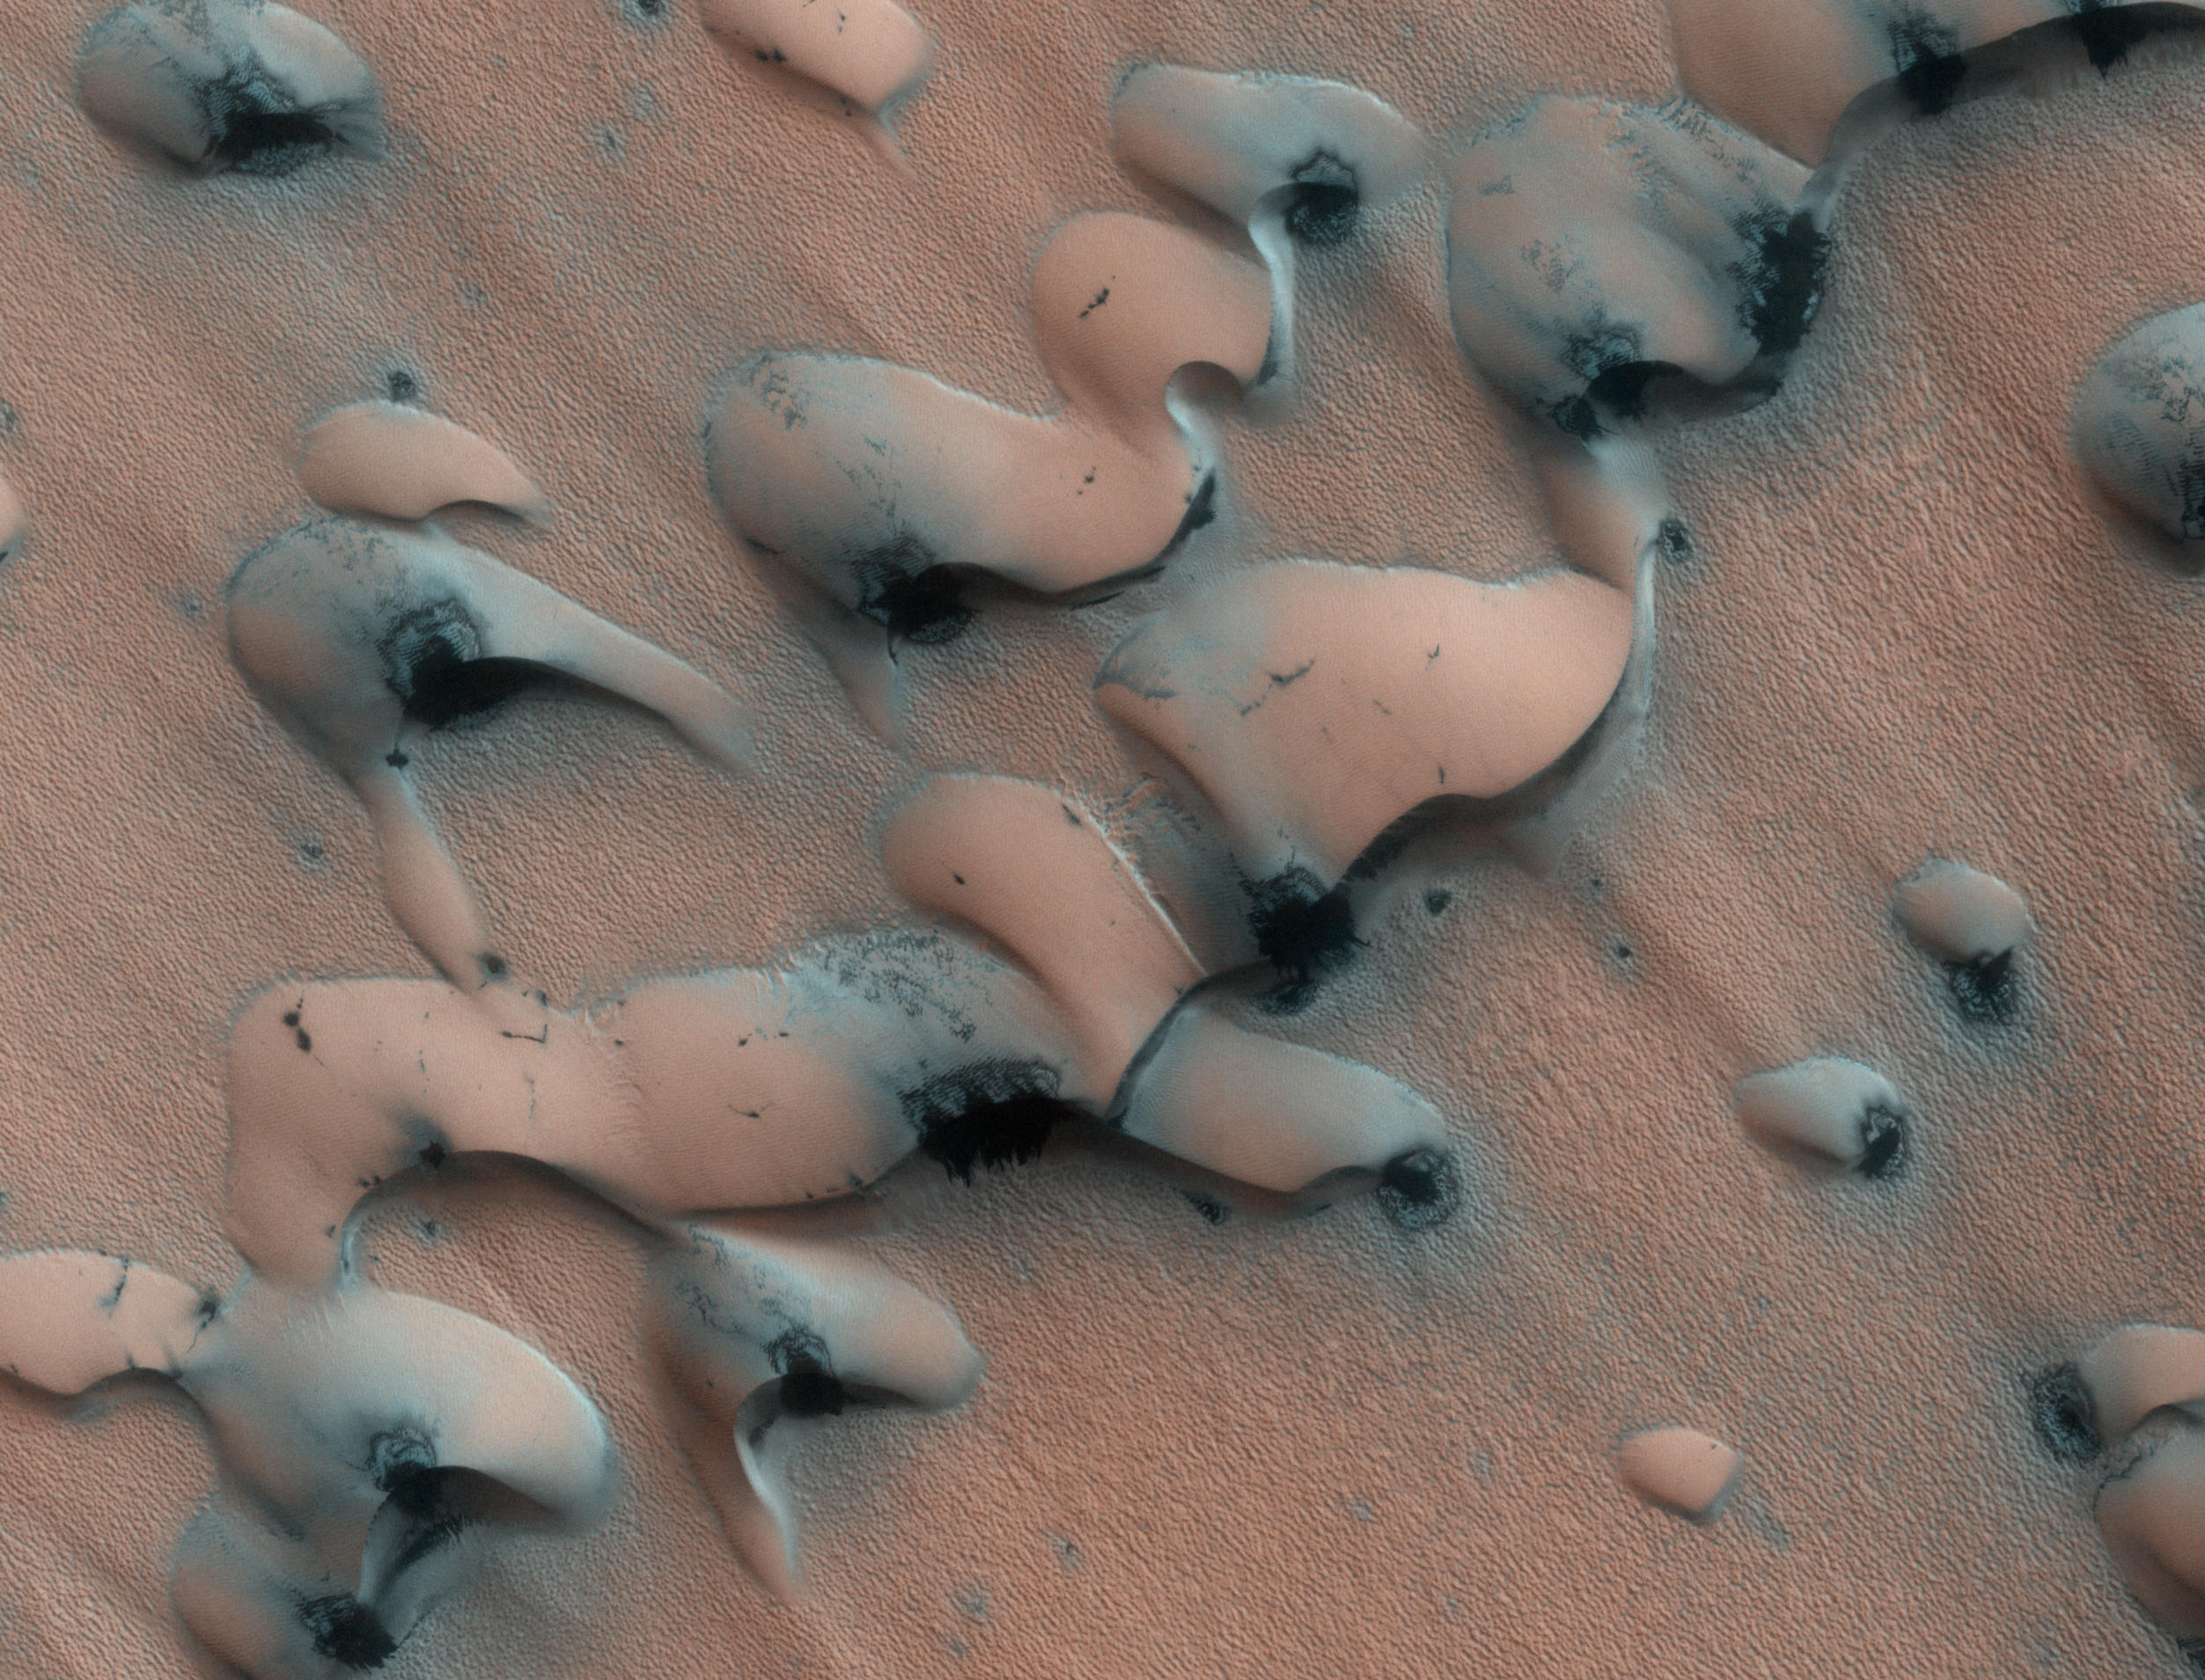 This image shows dunes near the north pole of Mars. The north pole is surrounded by a vast "sea" of basaltic sand dunes, and the dunes imaged here are similar to barchan dunes that are commonly found in desert regions on Earth.